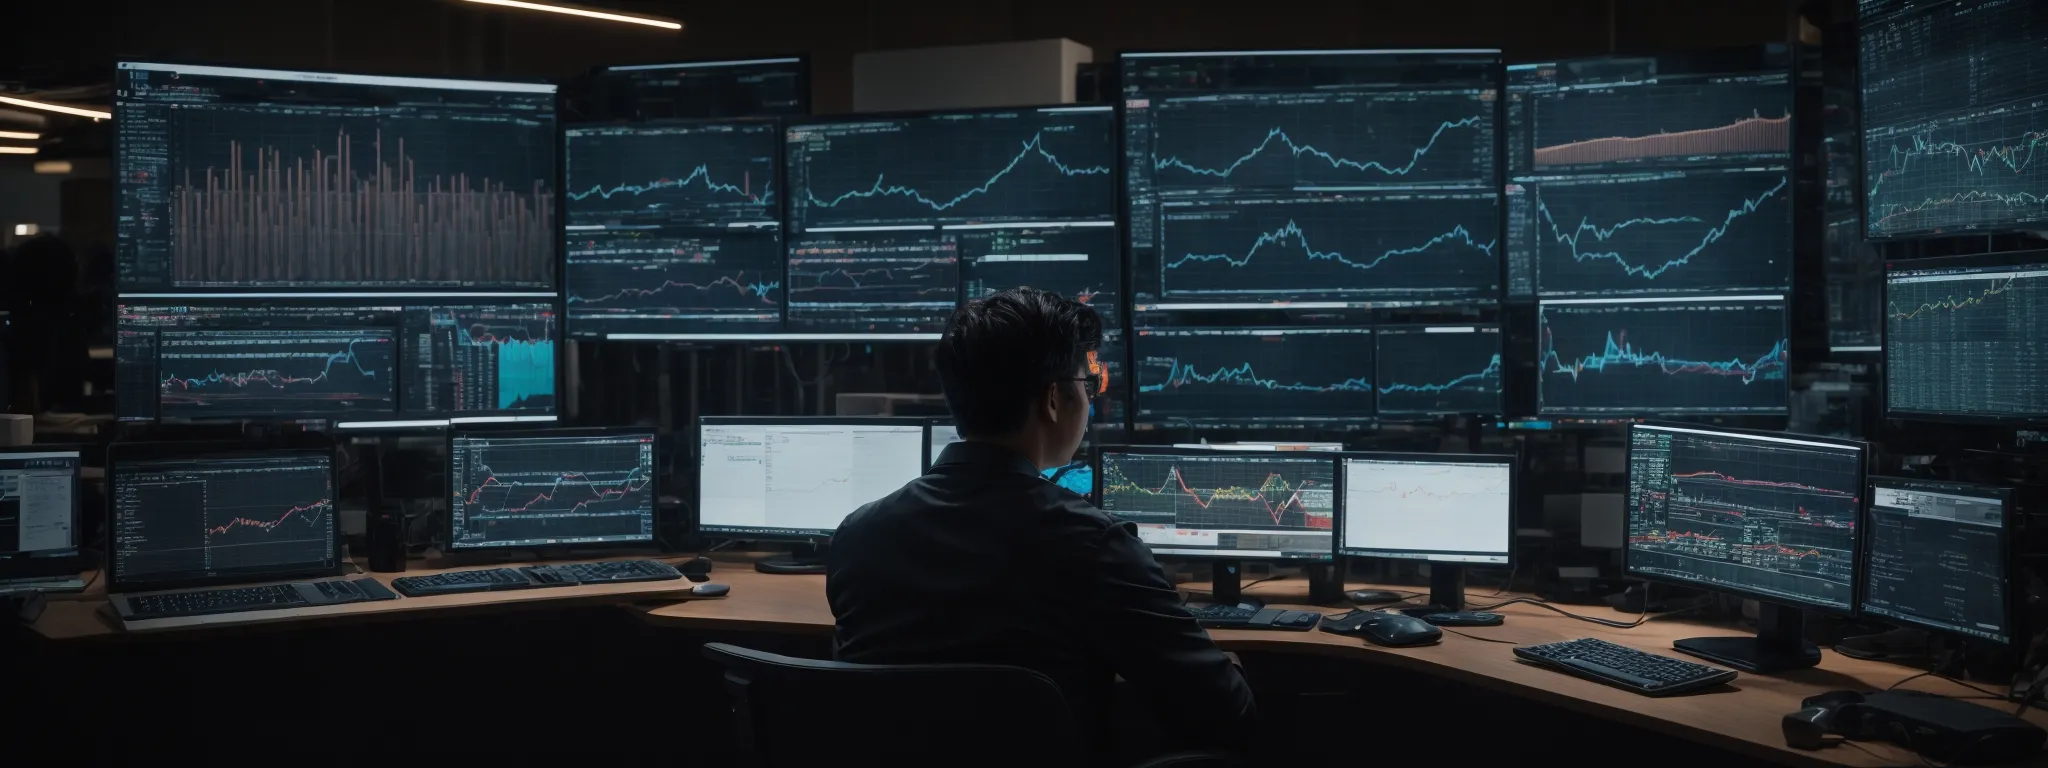 a person sits before multiple computer screens, analyzing complex charts and graphs that reflect web traffic and performance metrics.